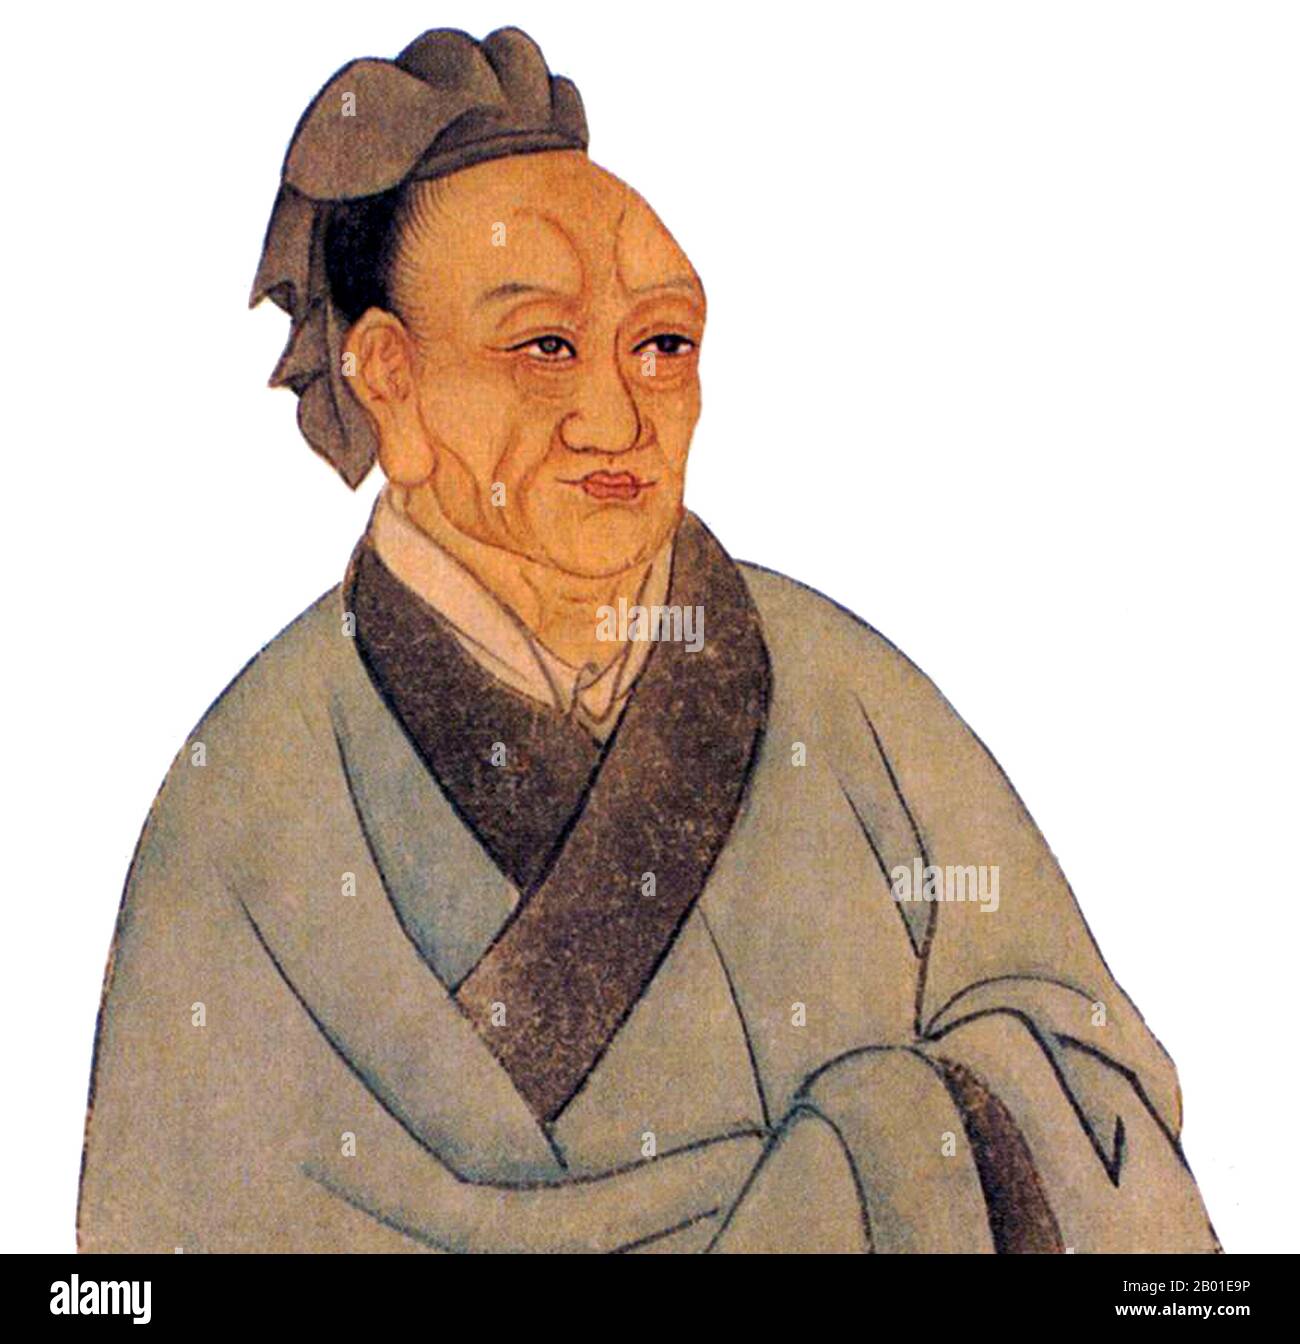 China: Sima Qian (c. 145-86 BCE), Father of Chinese historiography and 'Grand Historian' of China, early Han Dynasty (206 BCE - 220 CE).  Sima Qian (Wade-Giles: Ssu-ma Ch'ien) was a Prefect of the Grand Scribes (太史公) of the Han Dynasty.  He is regarded as the father of Chinese historiography for his highly praised work, Records of the Grand Historian, a 'Jizhuanti'-style general history of China, covering more than two thousand years from the Yellow Emperor to Emperor Wu of Han. His definitive work laid the foundation for later Chinese historiography. Stock Photo